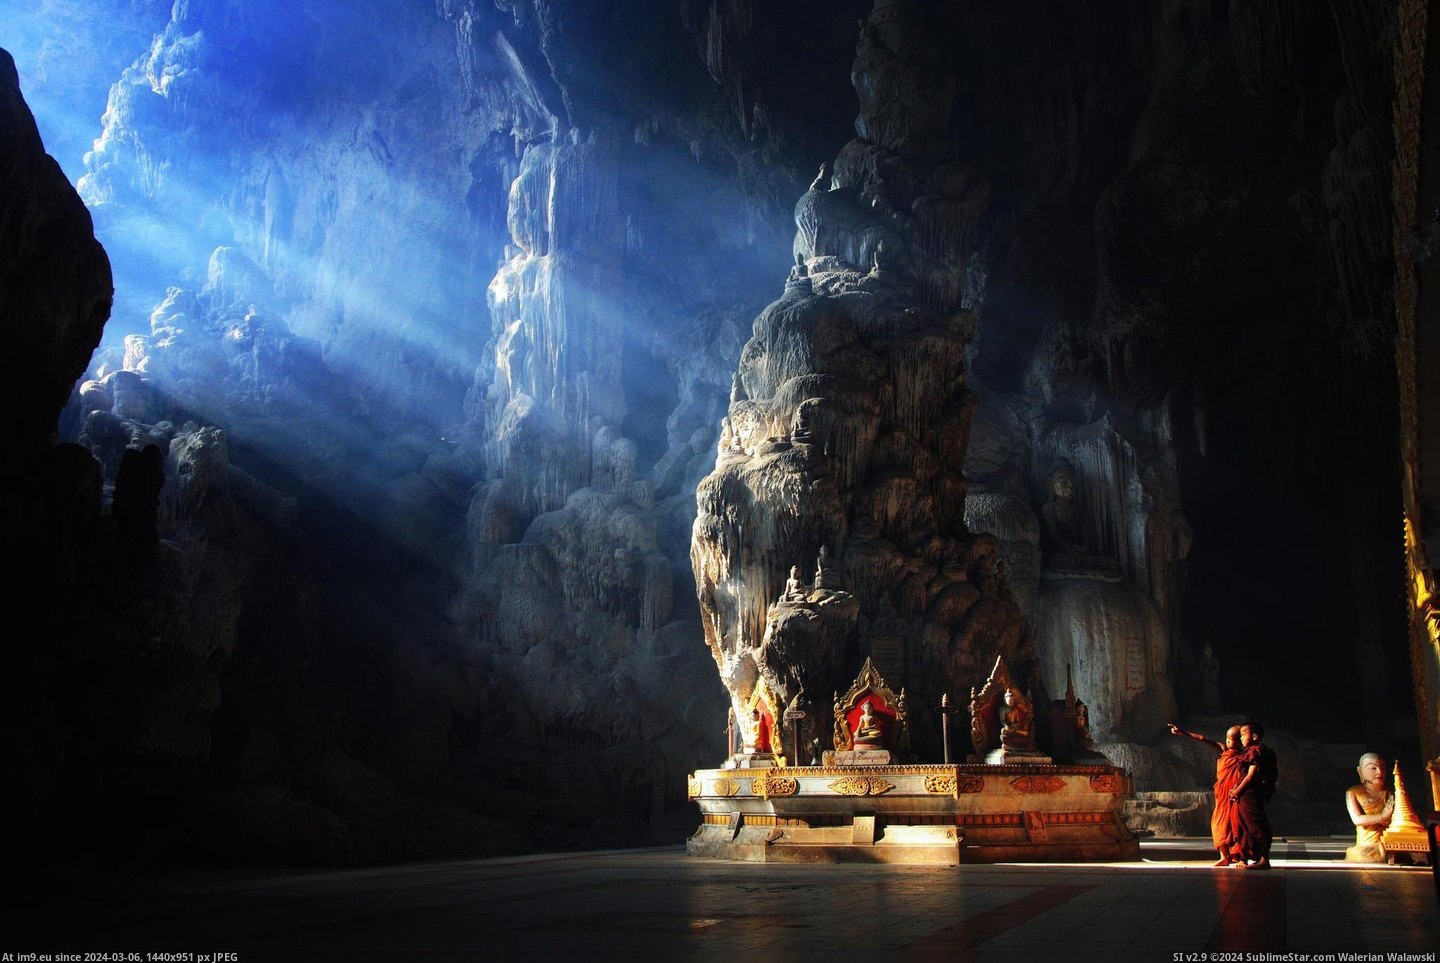 #Cave #Buddhist #Temple [Pics] A Buddhist temple inside a cave. Pic. (Image of album My r/PICS favs))